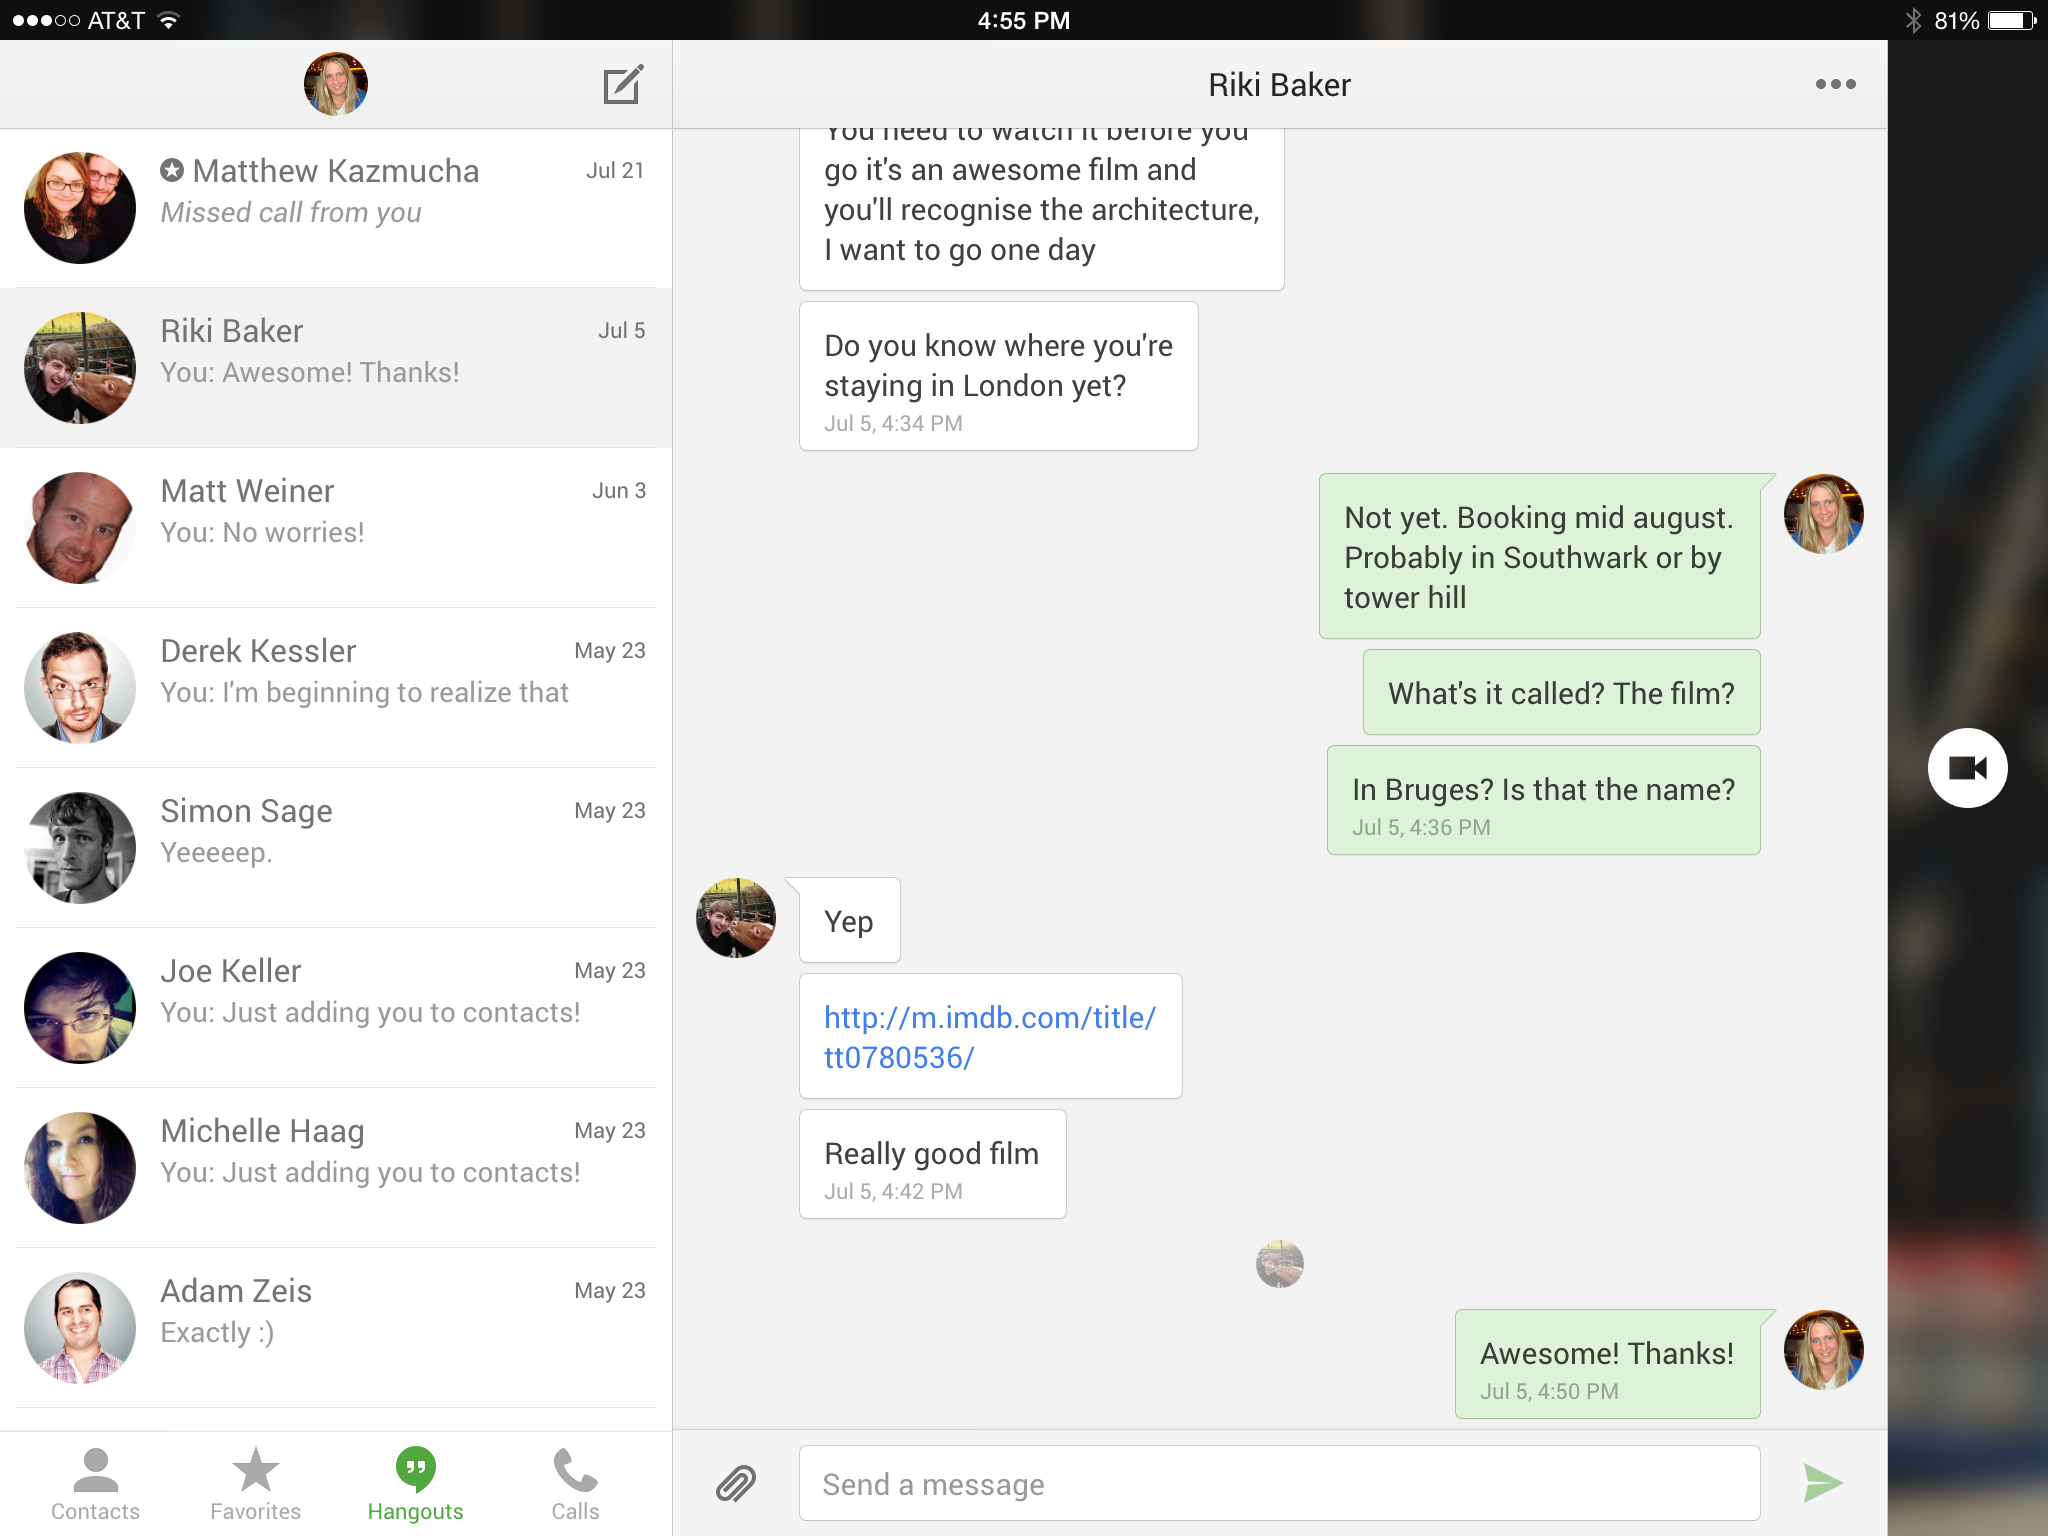 What apps allow live video chat on the iPad?